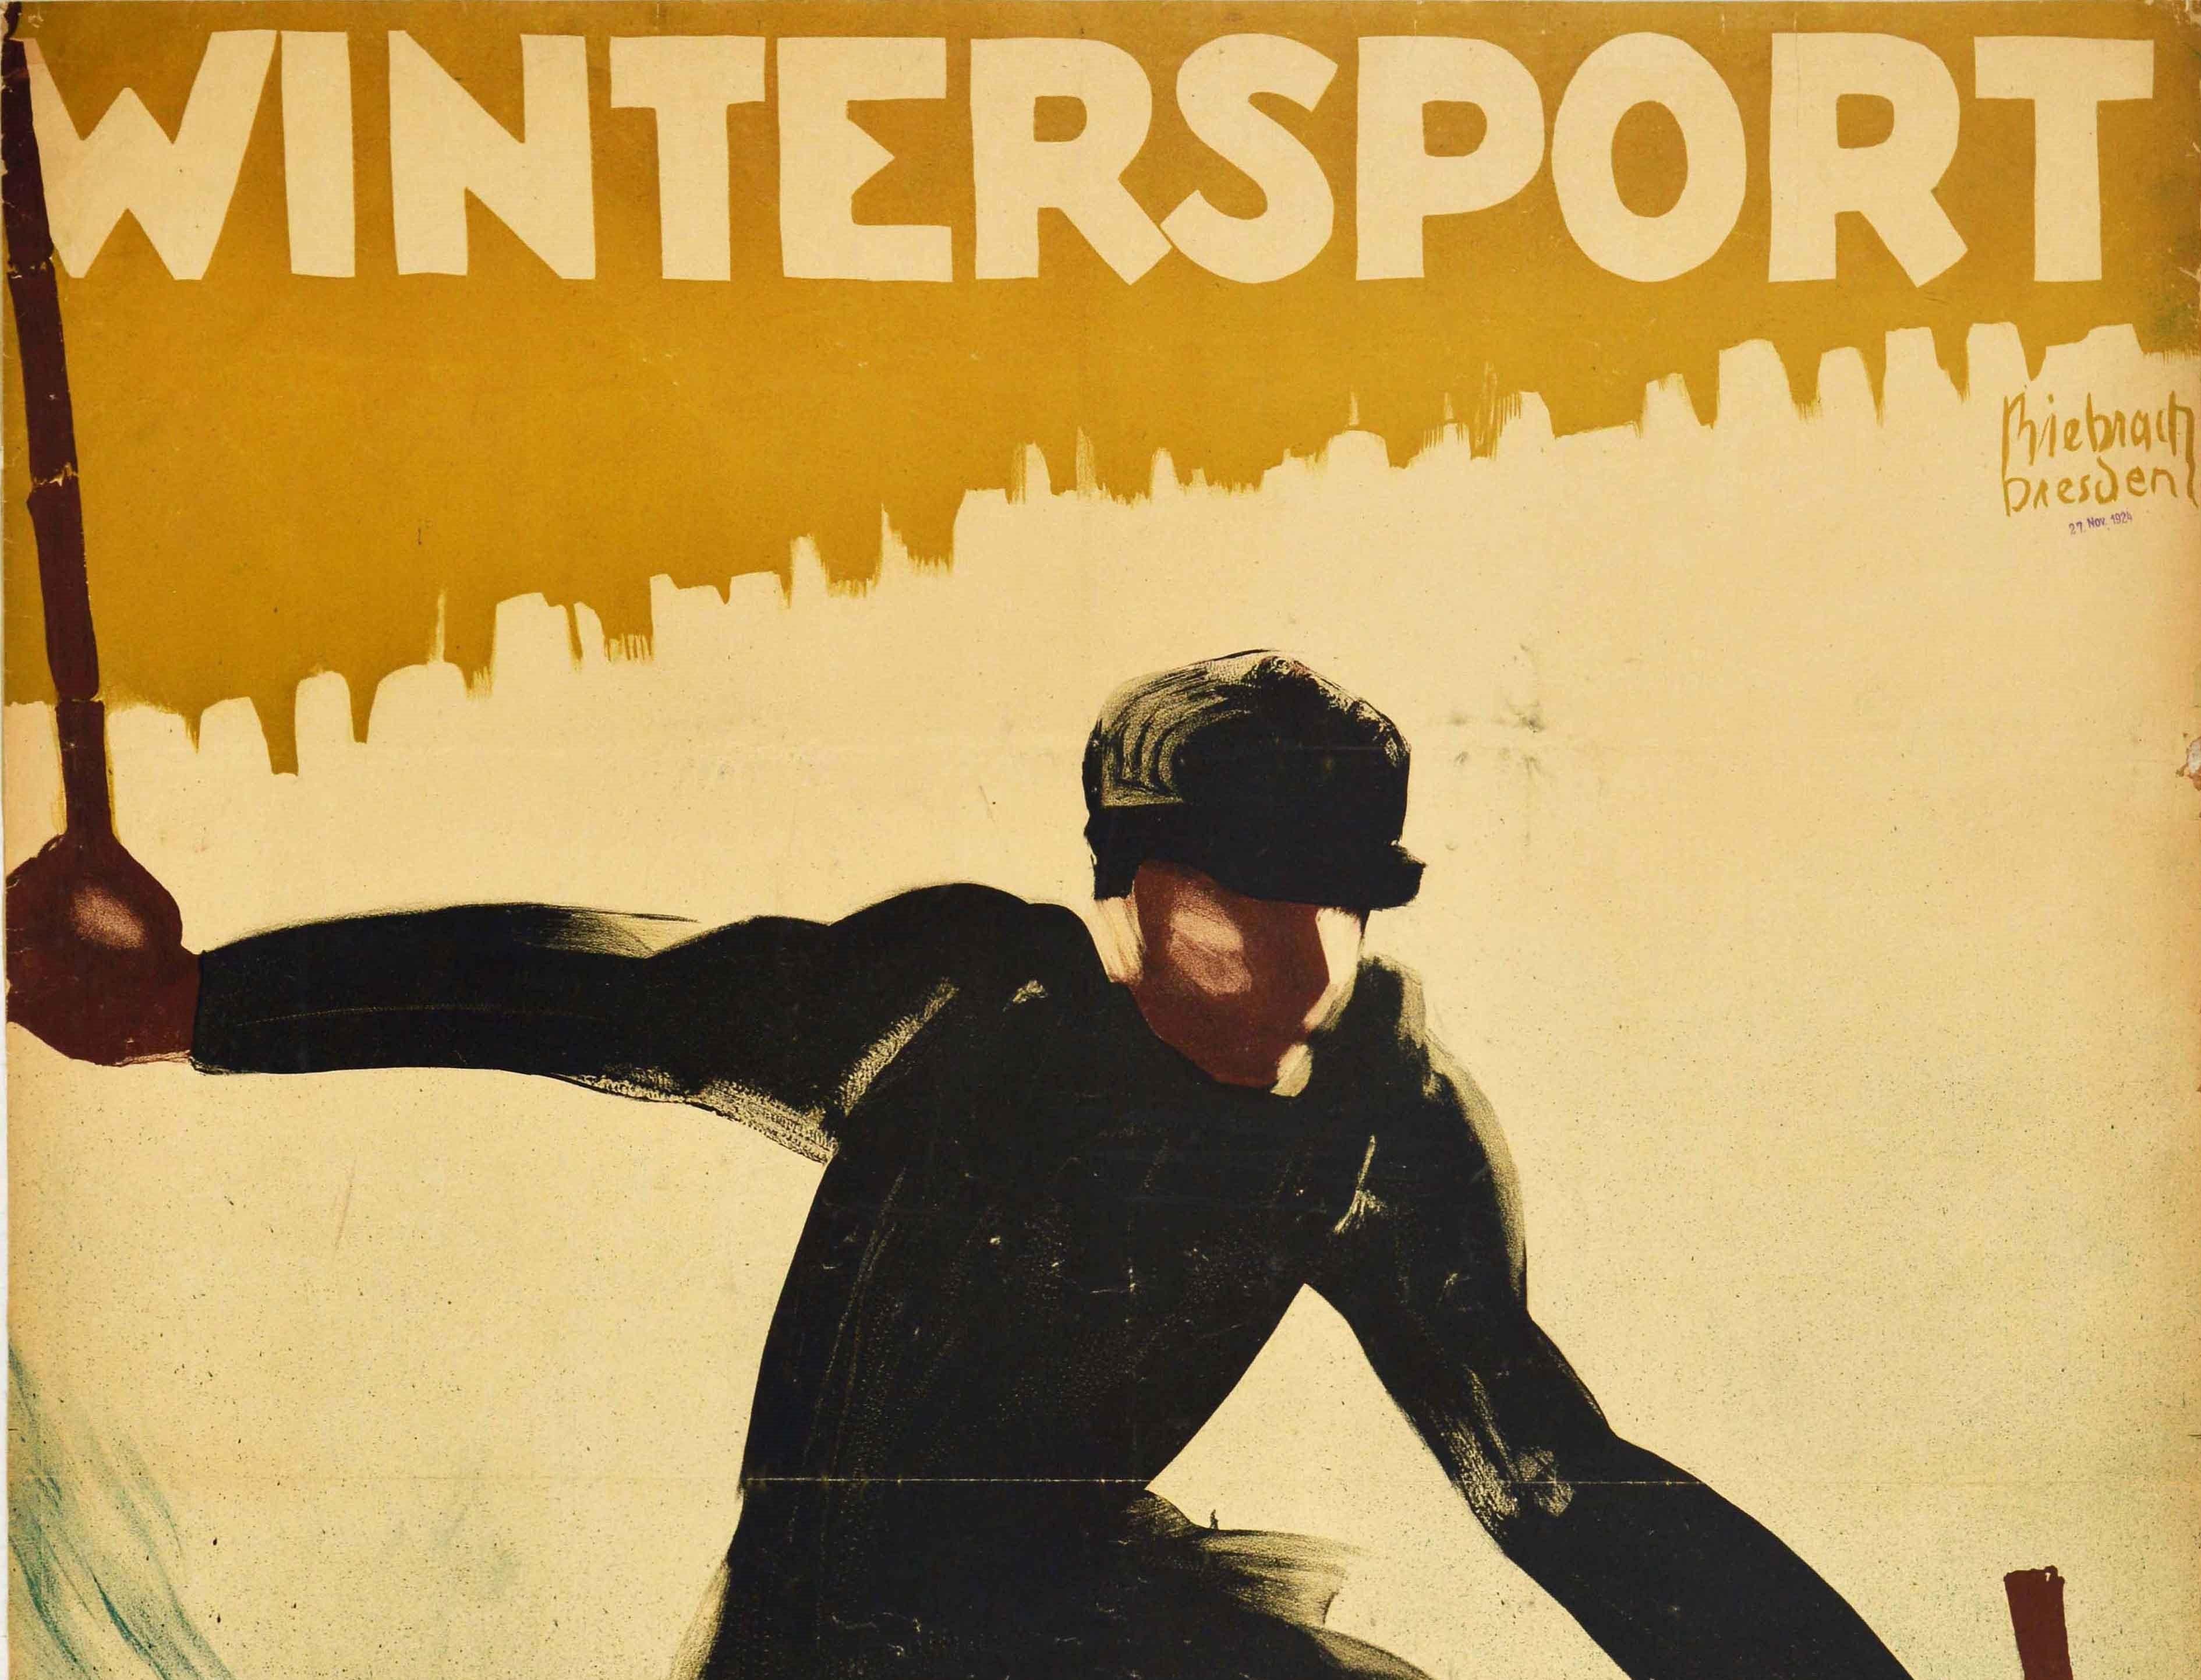 Original vintage ski poster entitled Wintersport featuring dynamic artwork by Karl Biebrach (b.1882) depicting a skier dressed in black skiing at speed down a snowy slope on wooden skis with the title in bold stylised lettering above. Large size.